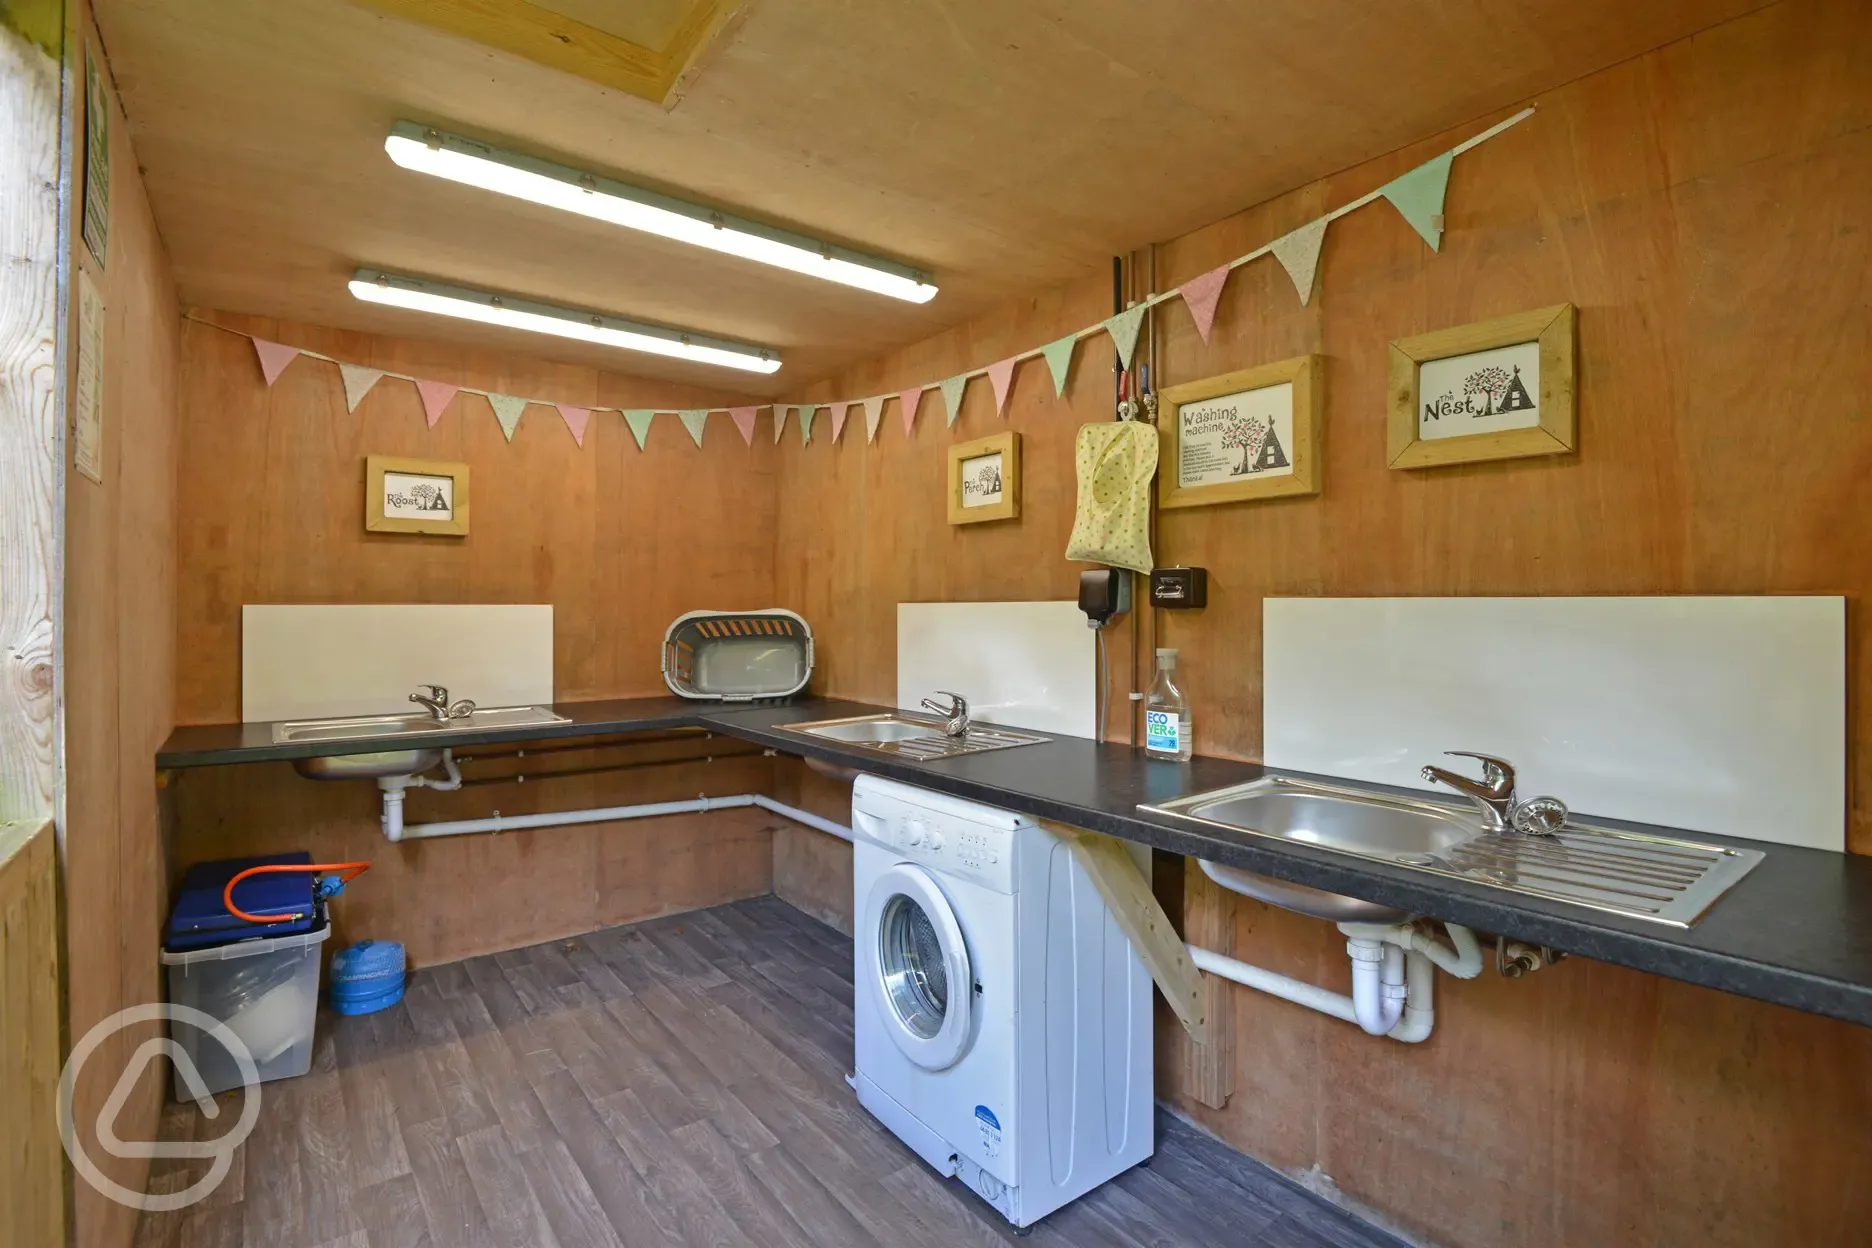 Kitchen and washing up area